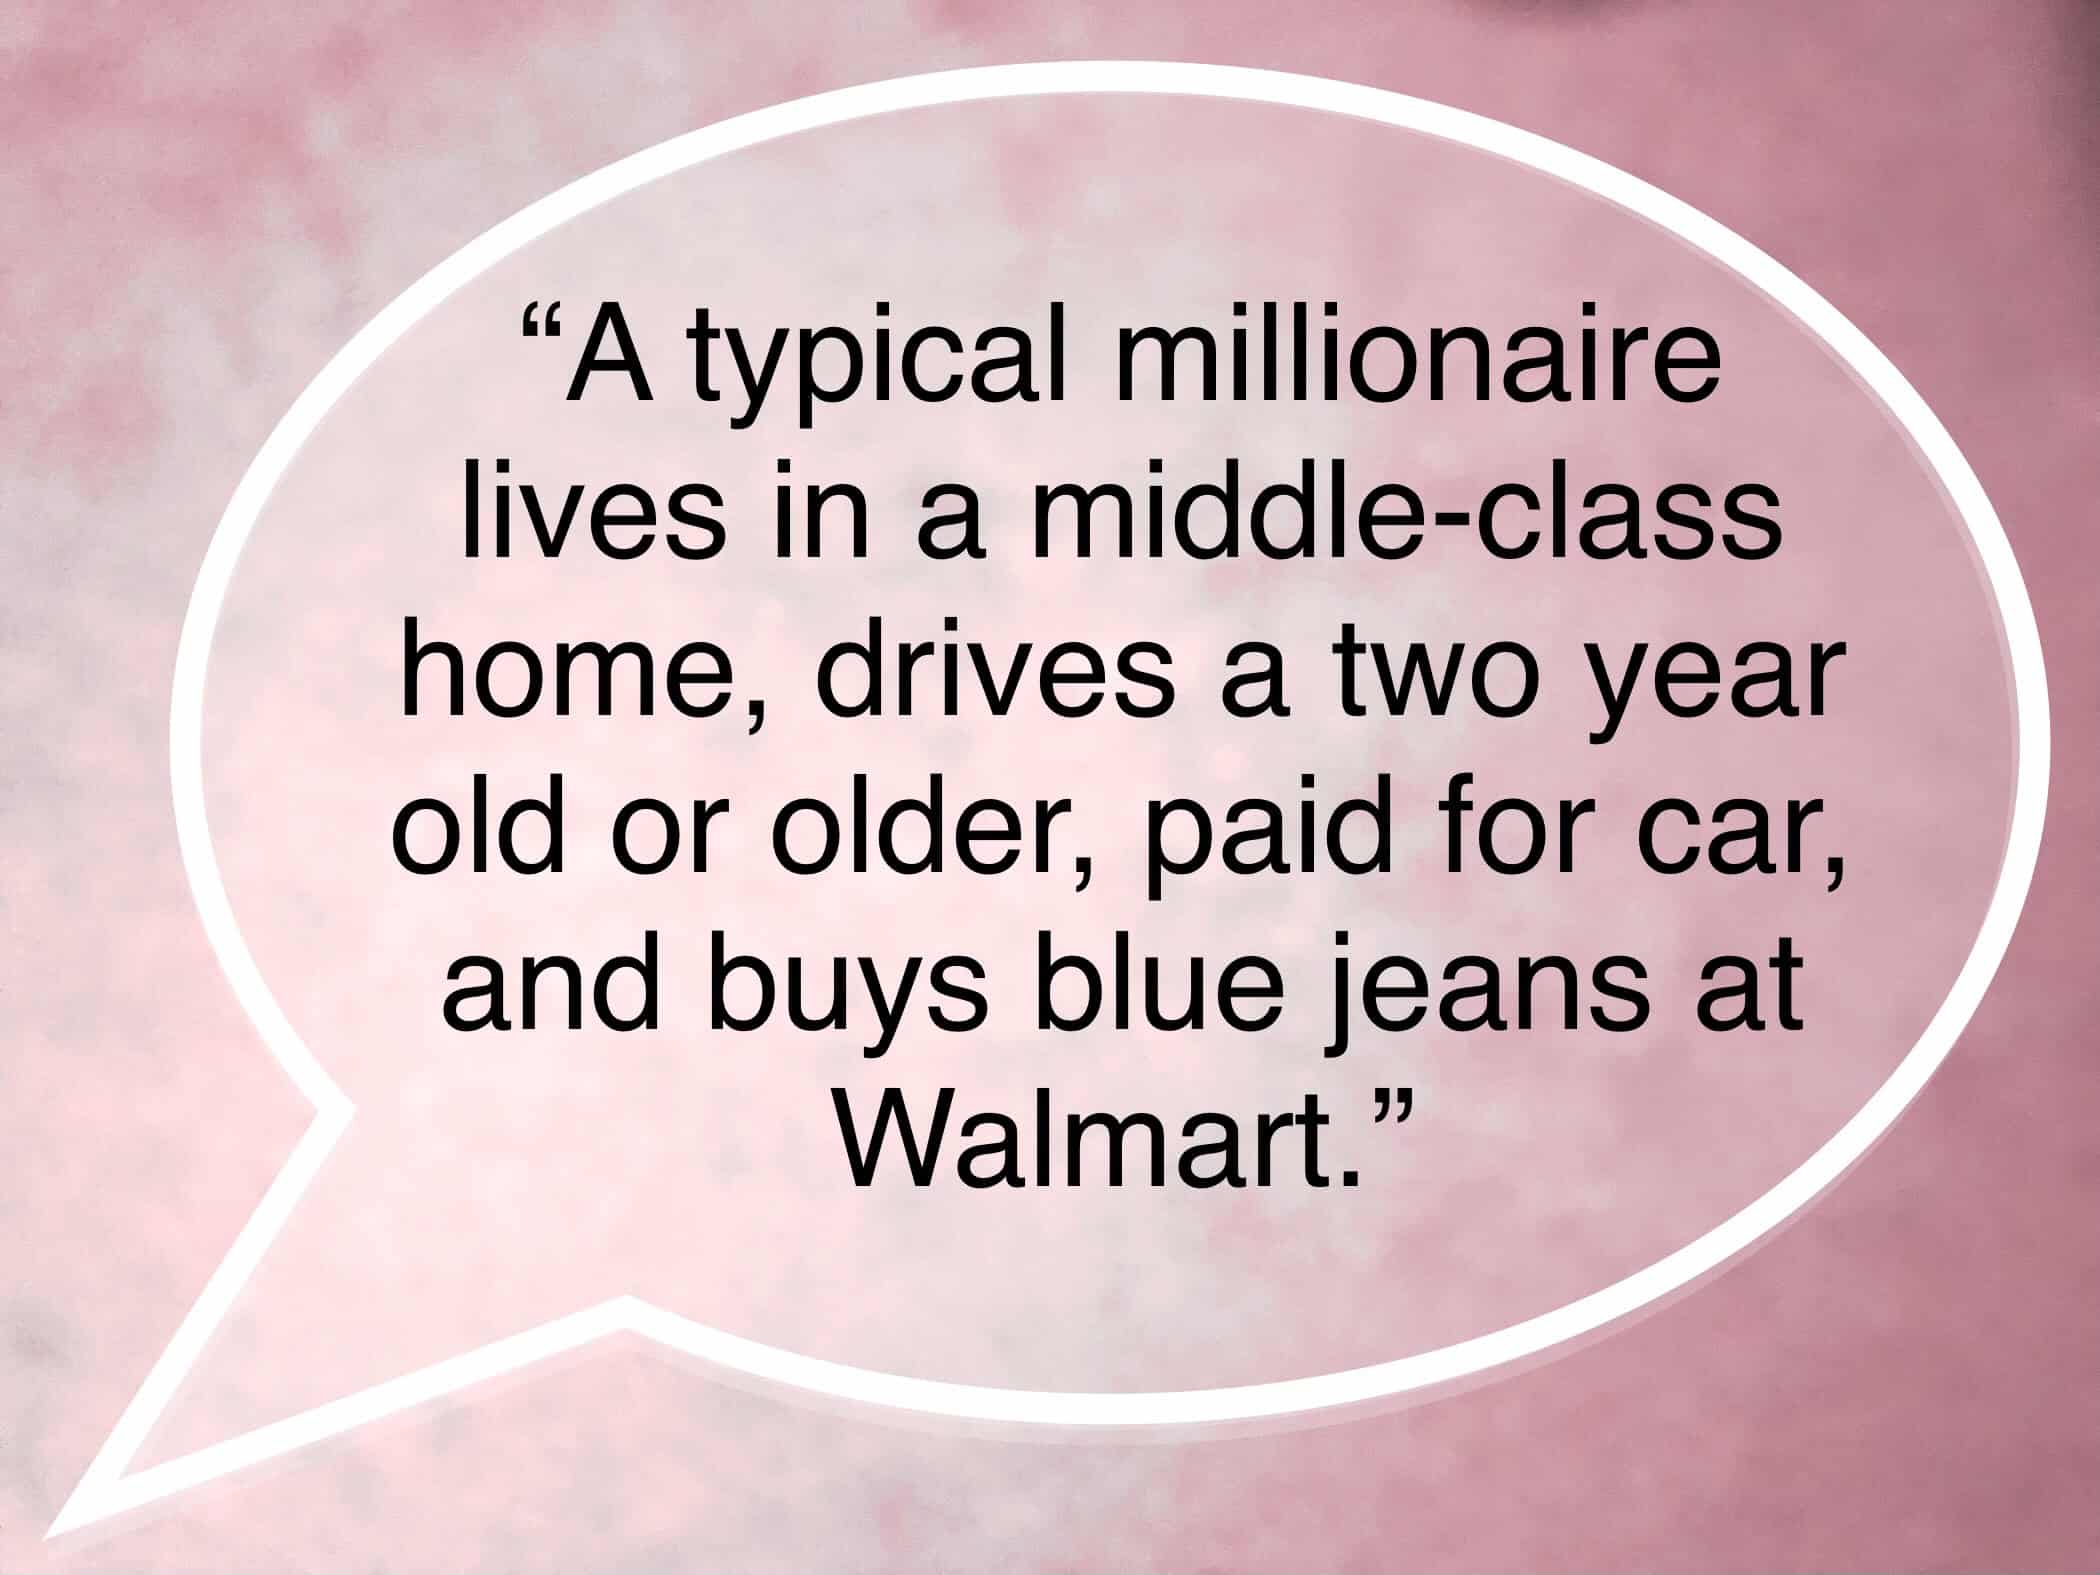 <ul> <li>A typical millionaire lives in a middle-class house, drives a two-year-old or older car, and buys blue jeans at Walmart. -Dave Ramsey</li> </ul> <p>Agree with this? Hit the Thumbs Up button above. Disagree? Let us know in the comments with what you'd change.</p>